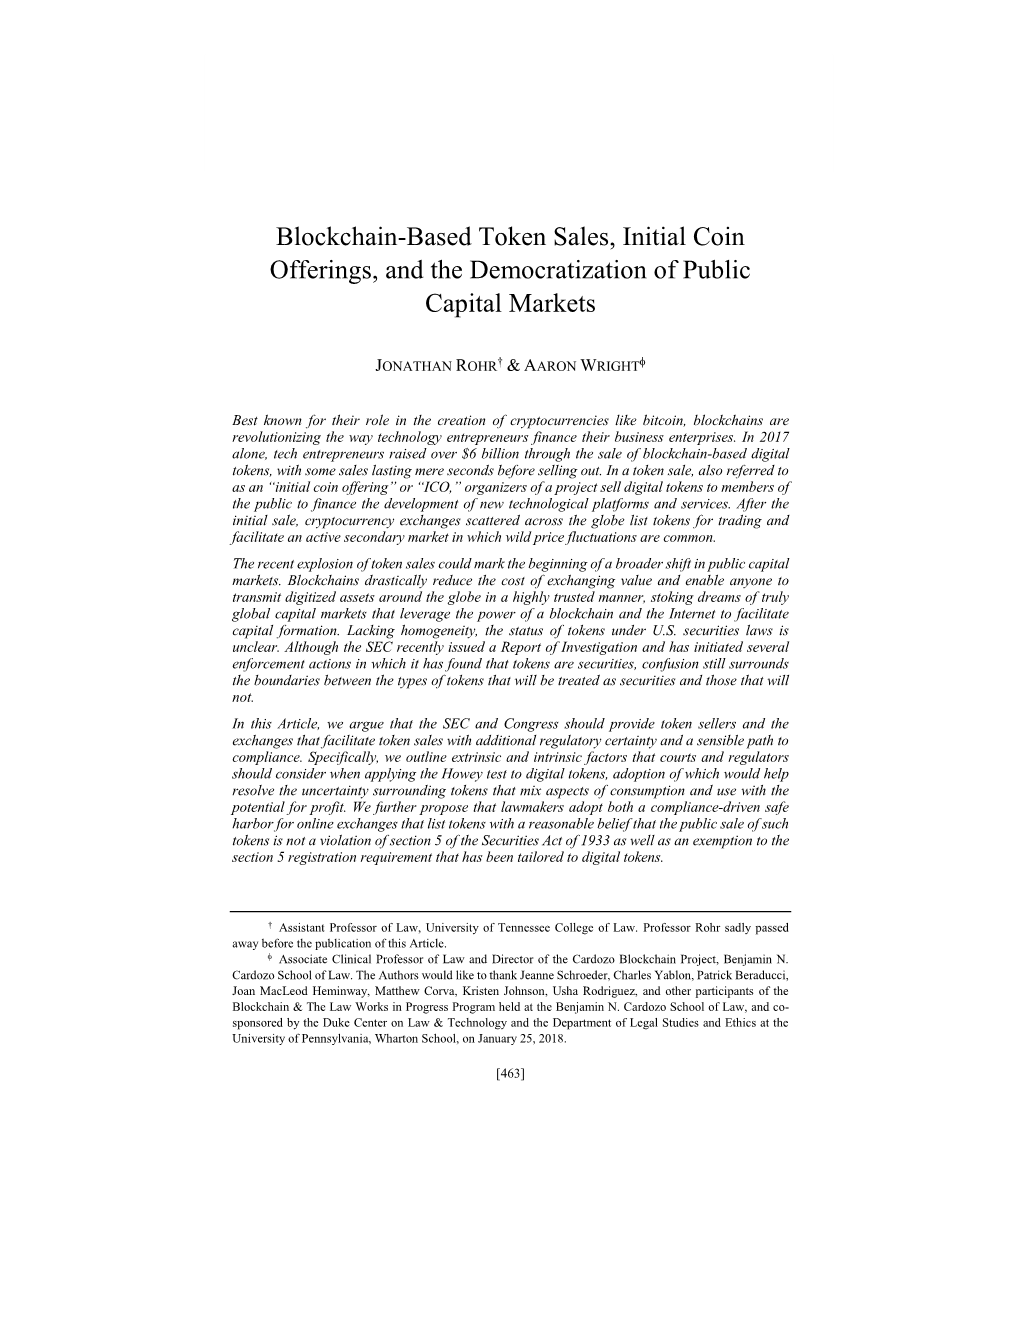 Blockchain-Based Token Sales, Initial Coin Offerings, and the Democratization of Public Capital Markets